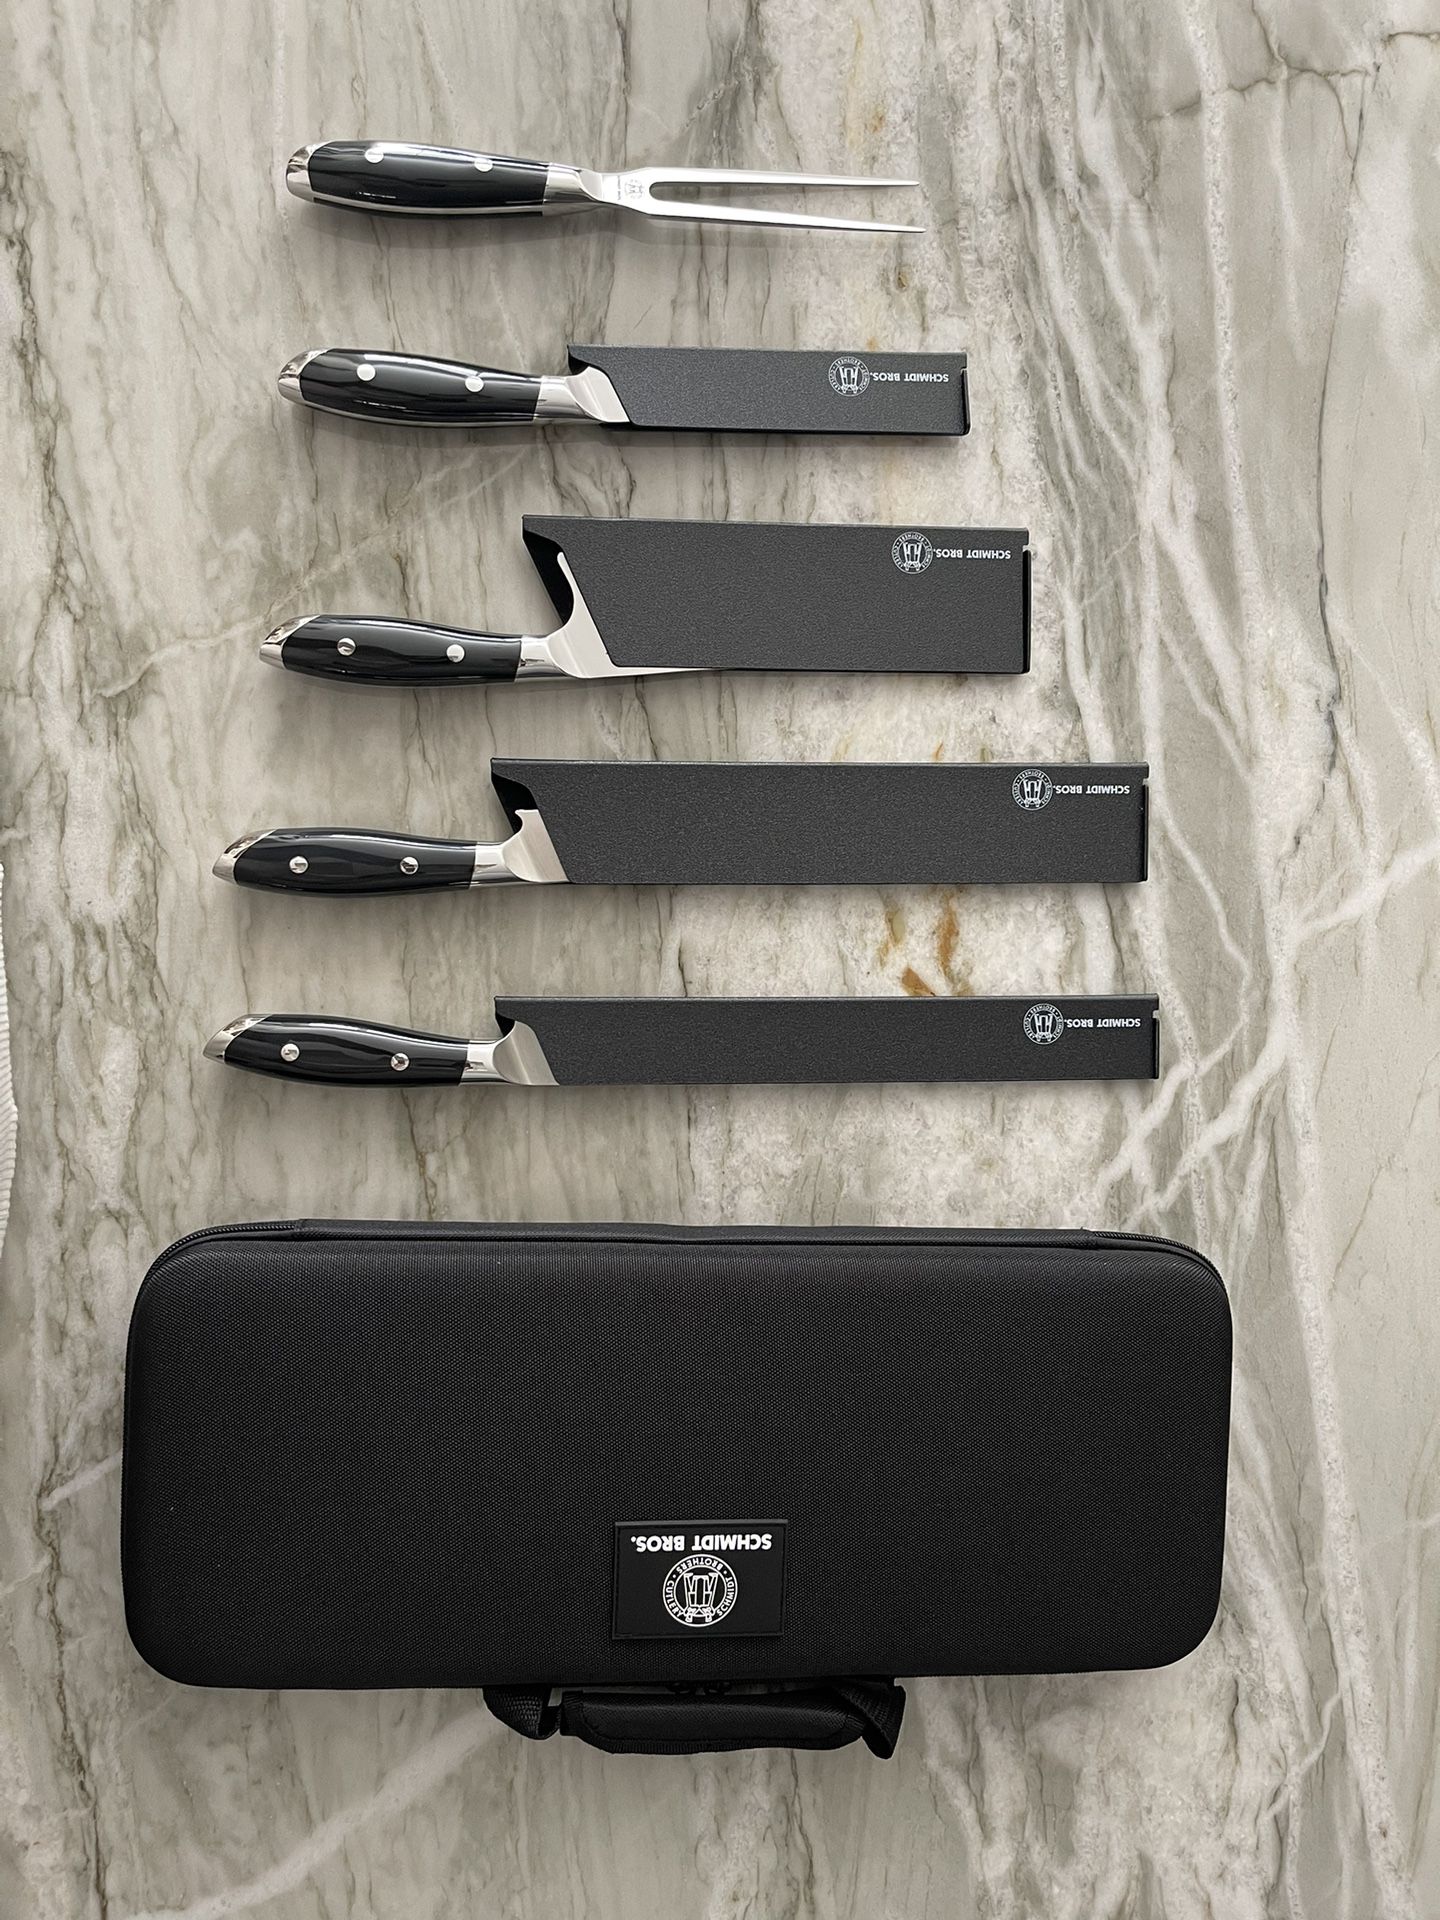 SALE ALERT!! Just in time for 🇺🇸 day, Schmidt Bros. 6 Piece BBQ Knif